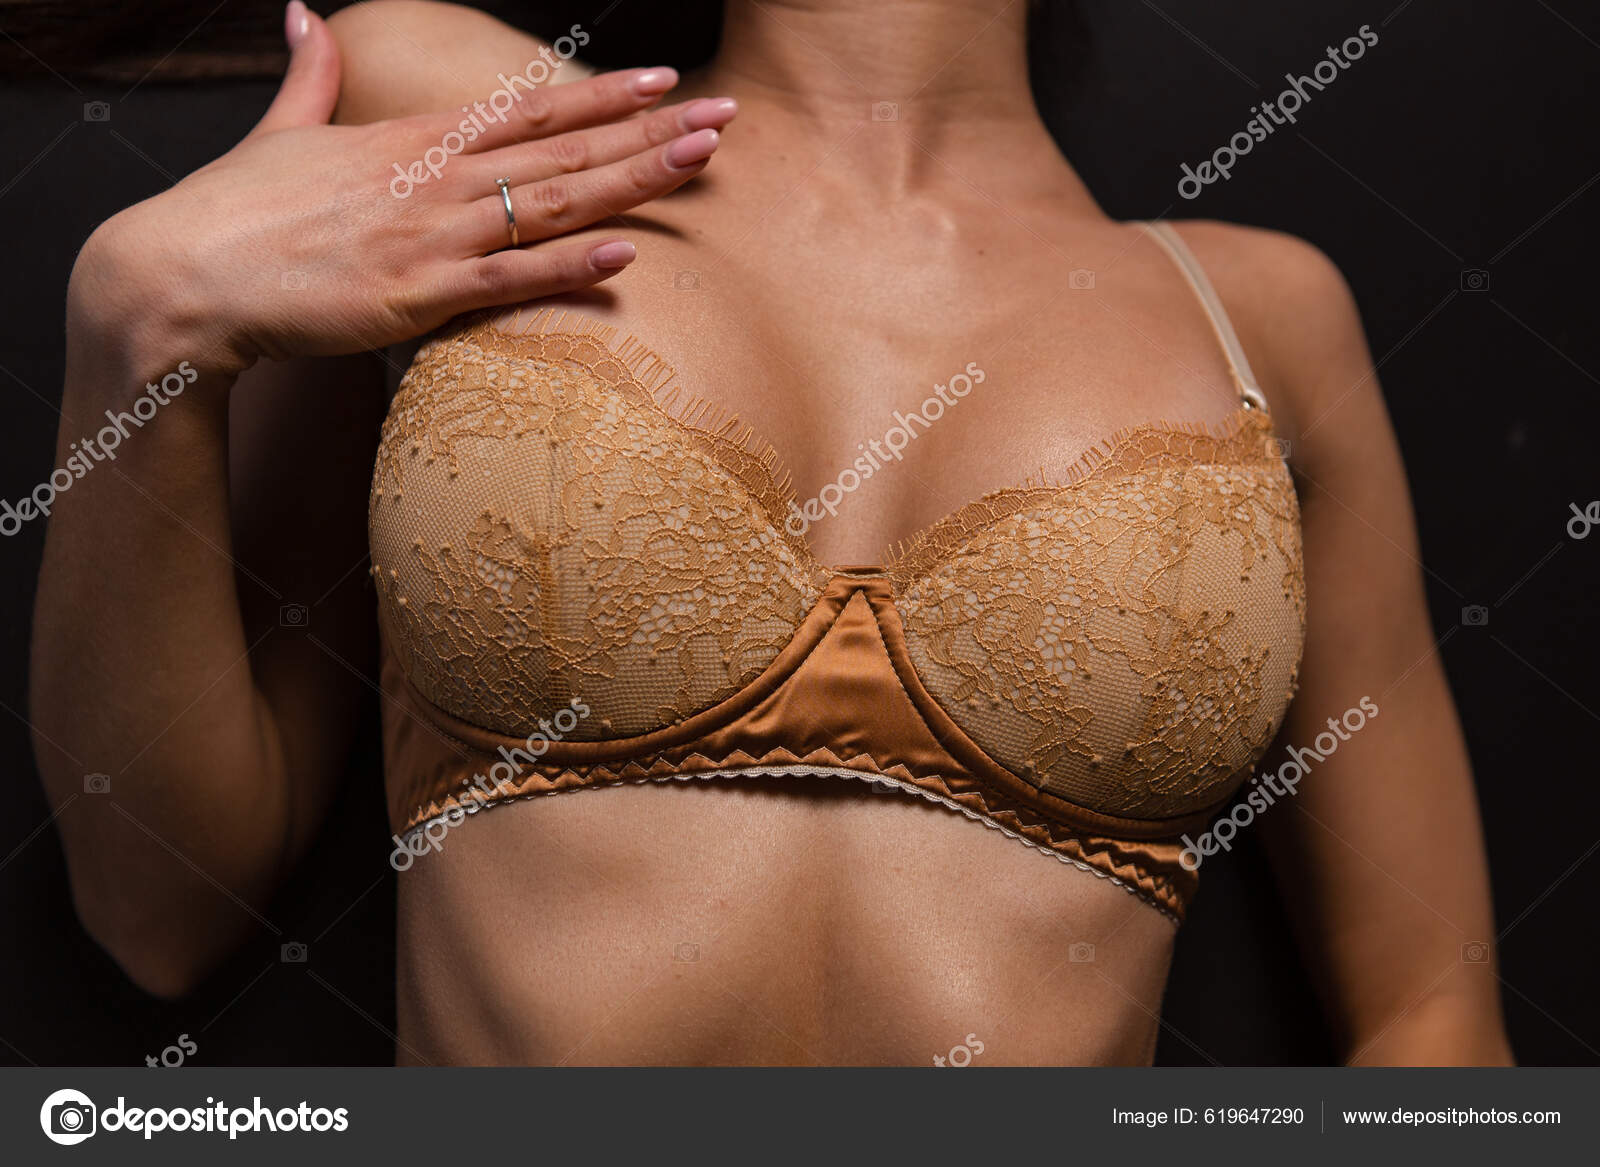 Beautiful Woman's Tanned Athletic Body Lingerie Stock Photo by